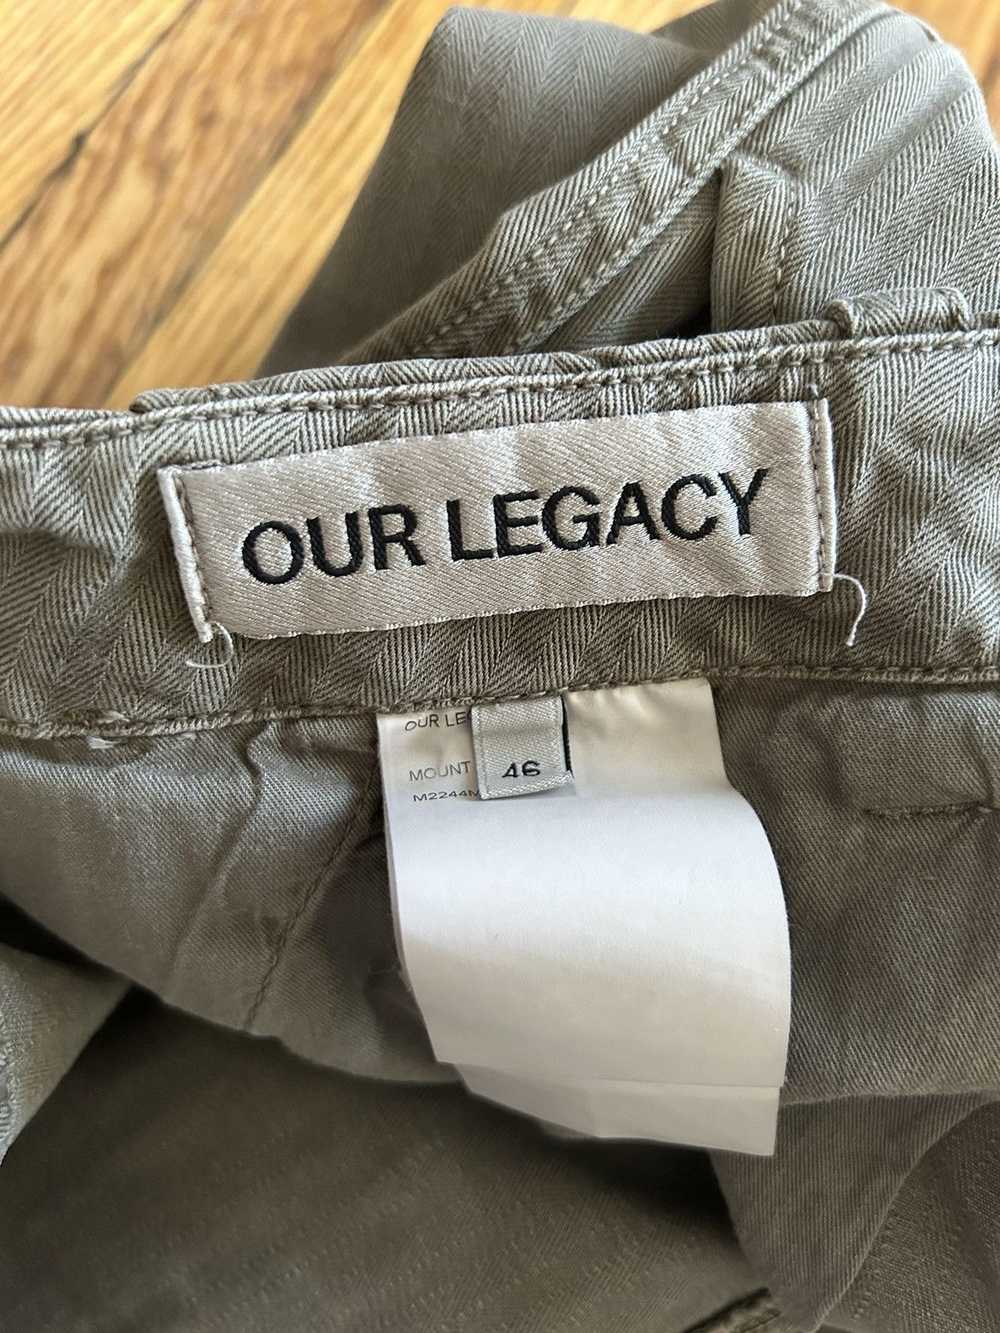 Our Legacy Our Legacy Mount Cargo (Uniform Olive) - image 4